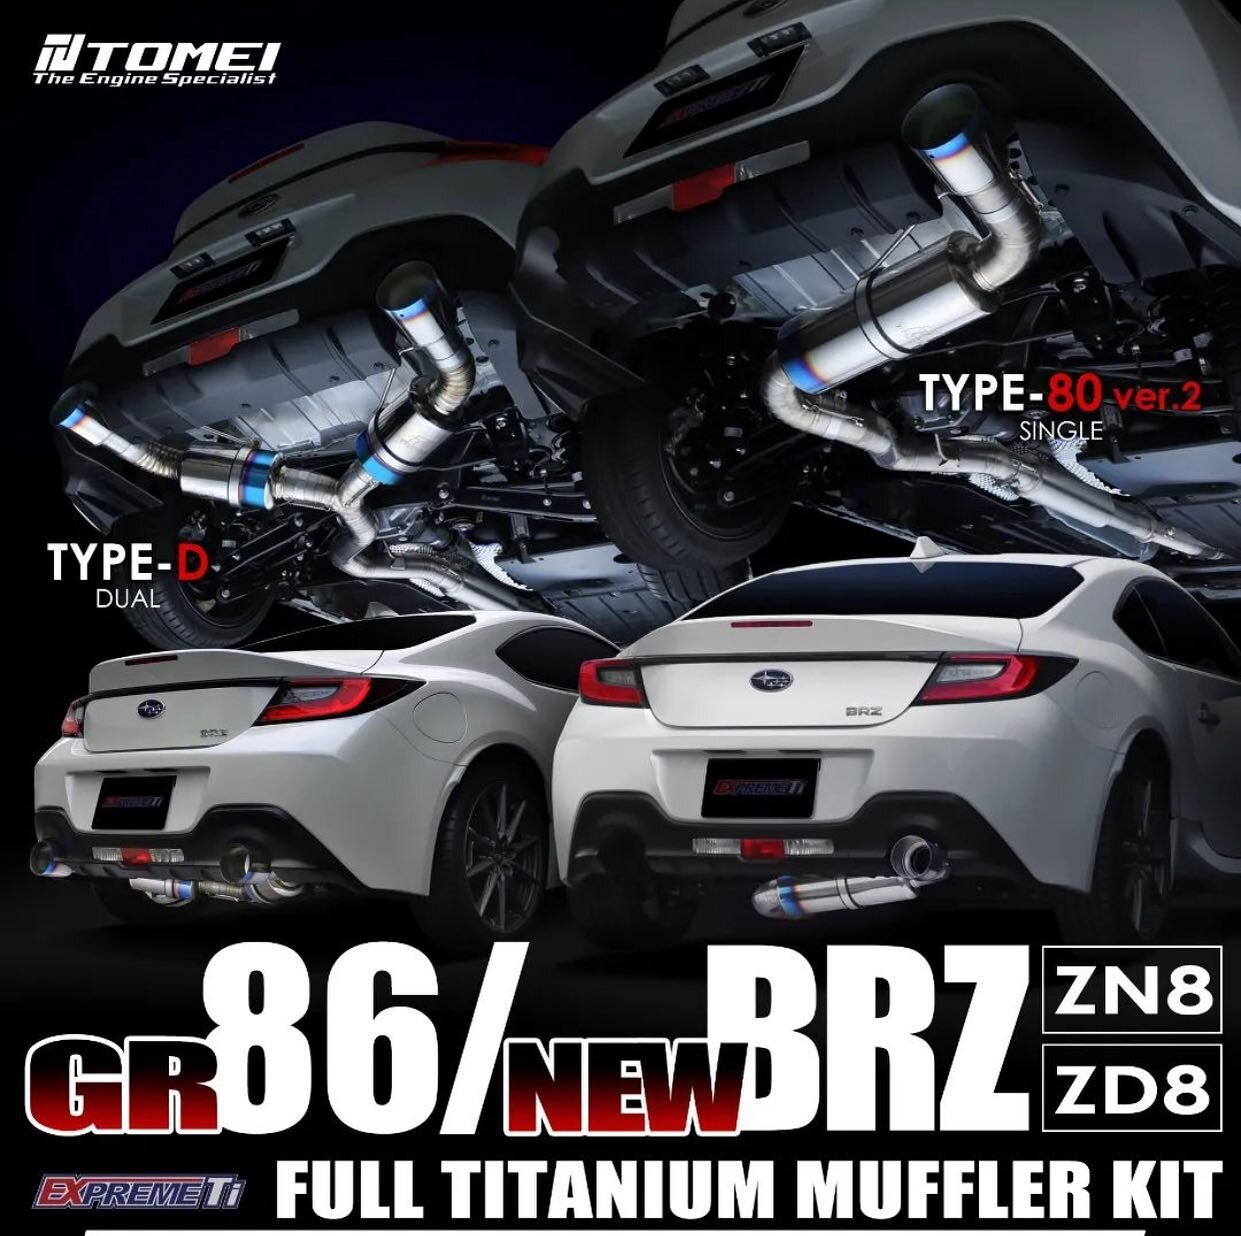 New release from Tomei for 22+ Toyota GR86 / 22+ Subaru BRZ 

🏎 Aftermarket Performance Parts
💰Financing available
📧 info@kenjigarage.com
📲 714-417-2698
🌎 Ship World Wide
💻 www.kenjigarage.com

#scion #subaru #toyota #toyotagr86 #subarubrz #trd